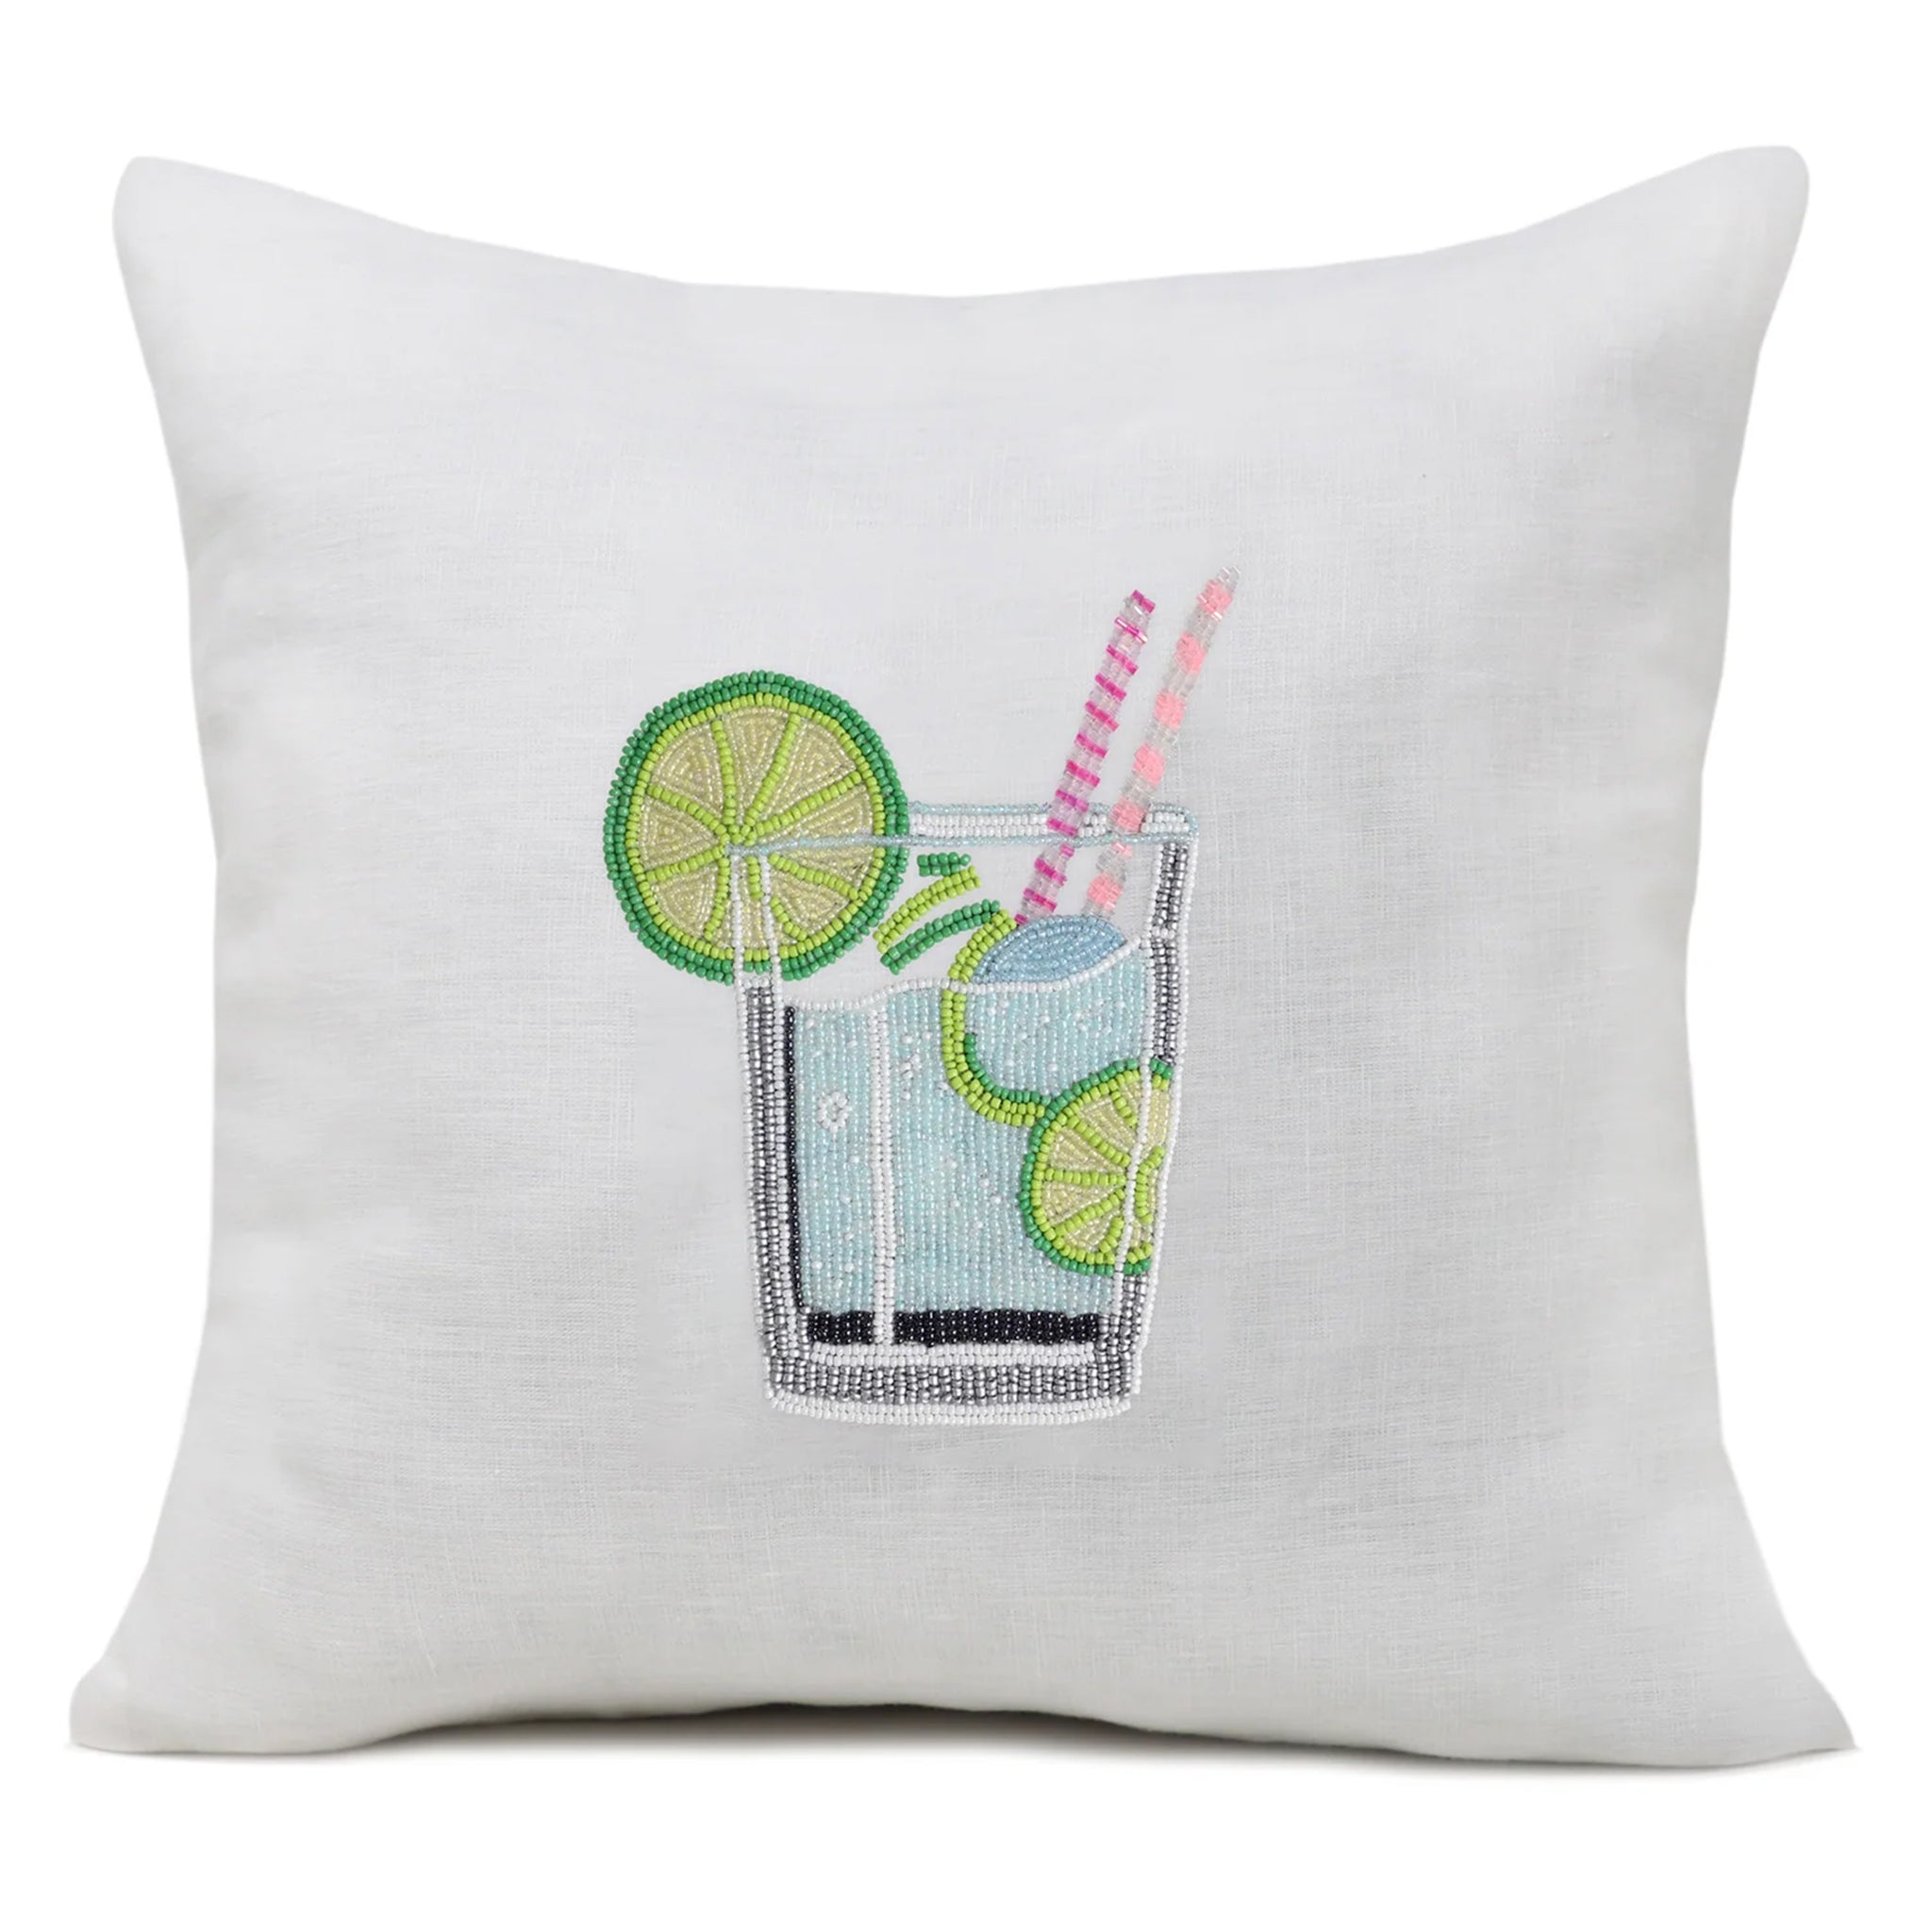 Cocktail Pillow Cover, Drinks Pillow Cover by Amore Beauté